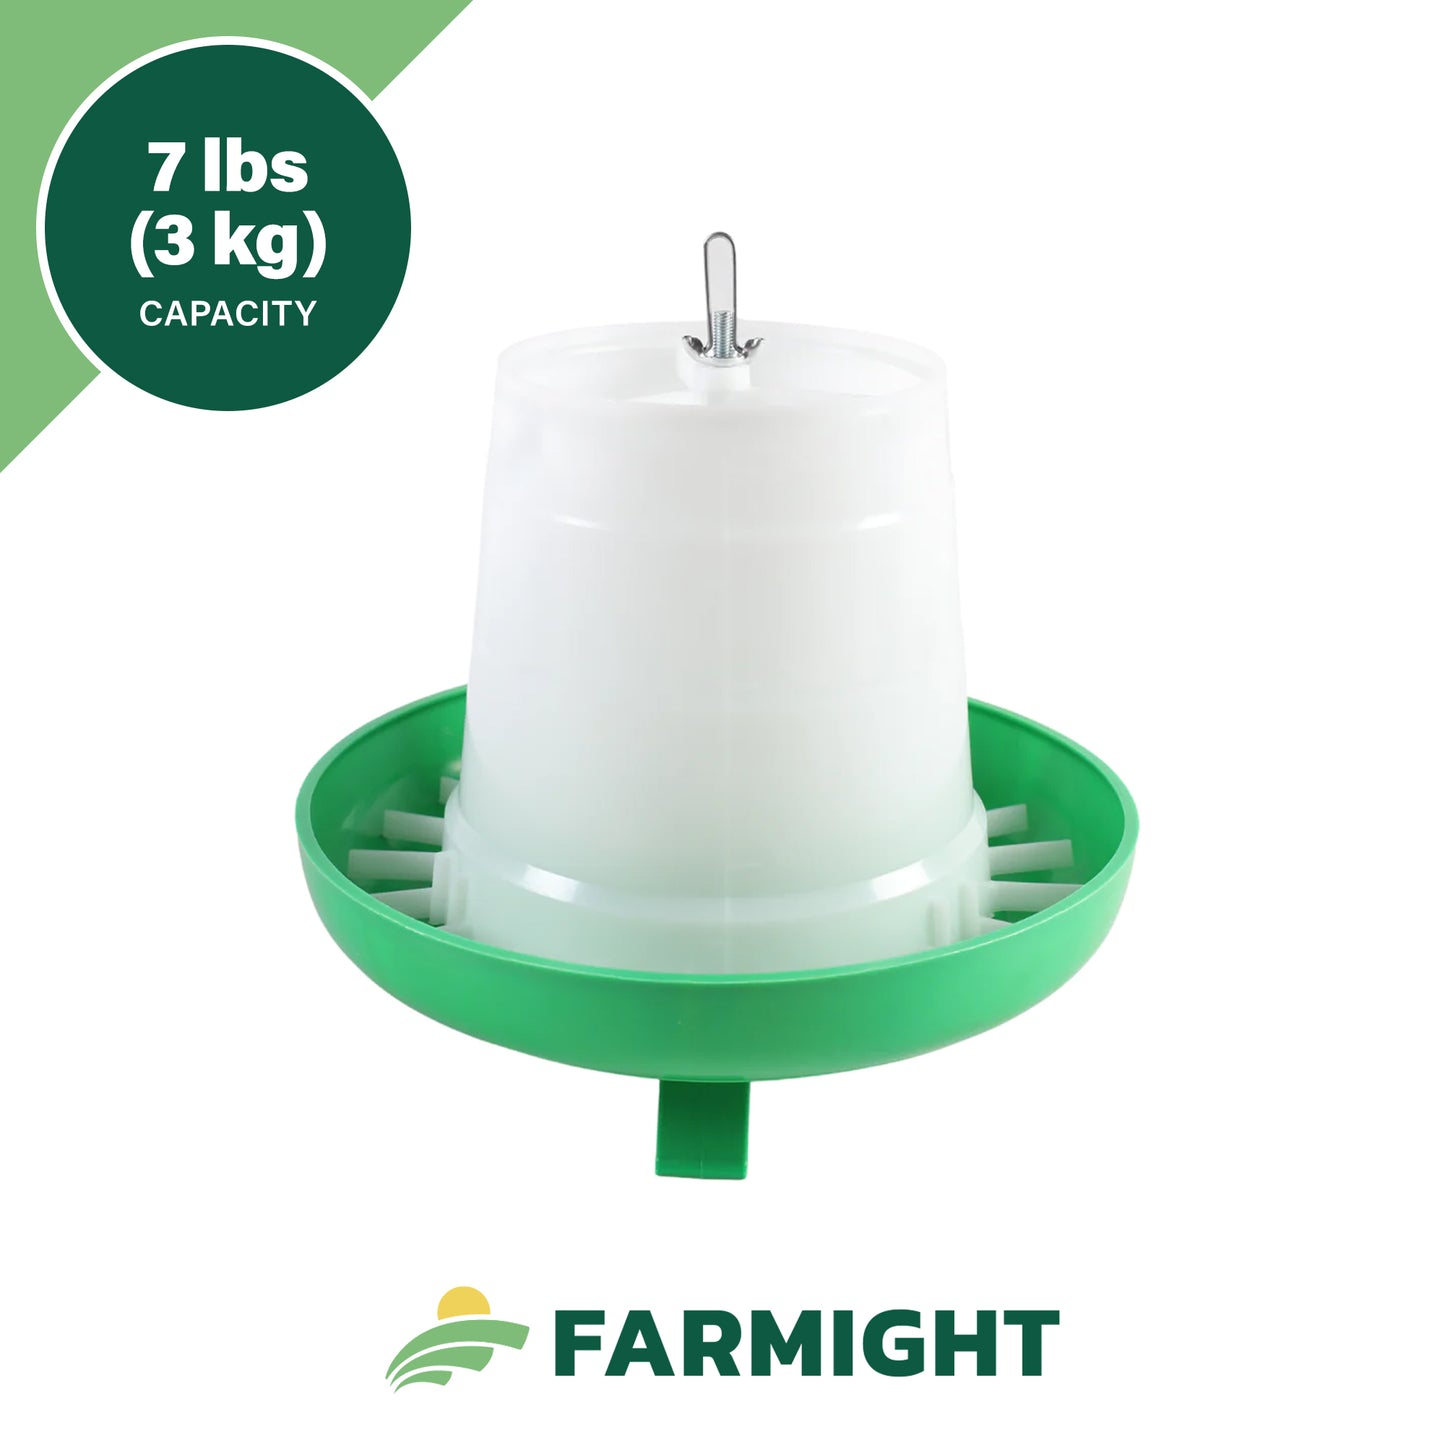 Designed with three foldable legs, this feeder keeps the feed elevated and off the ground, preventing contamination and reducing waste.